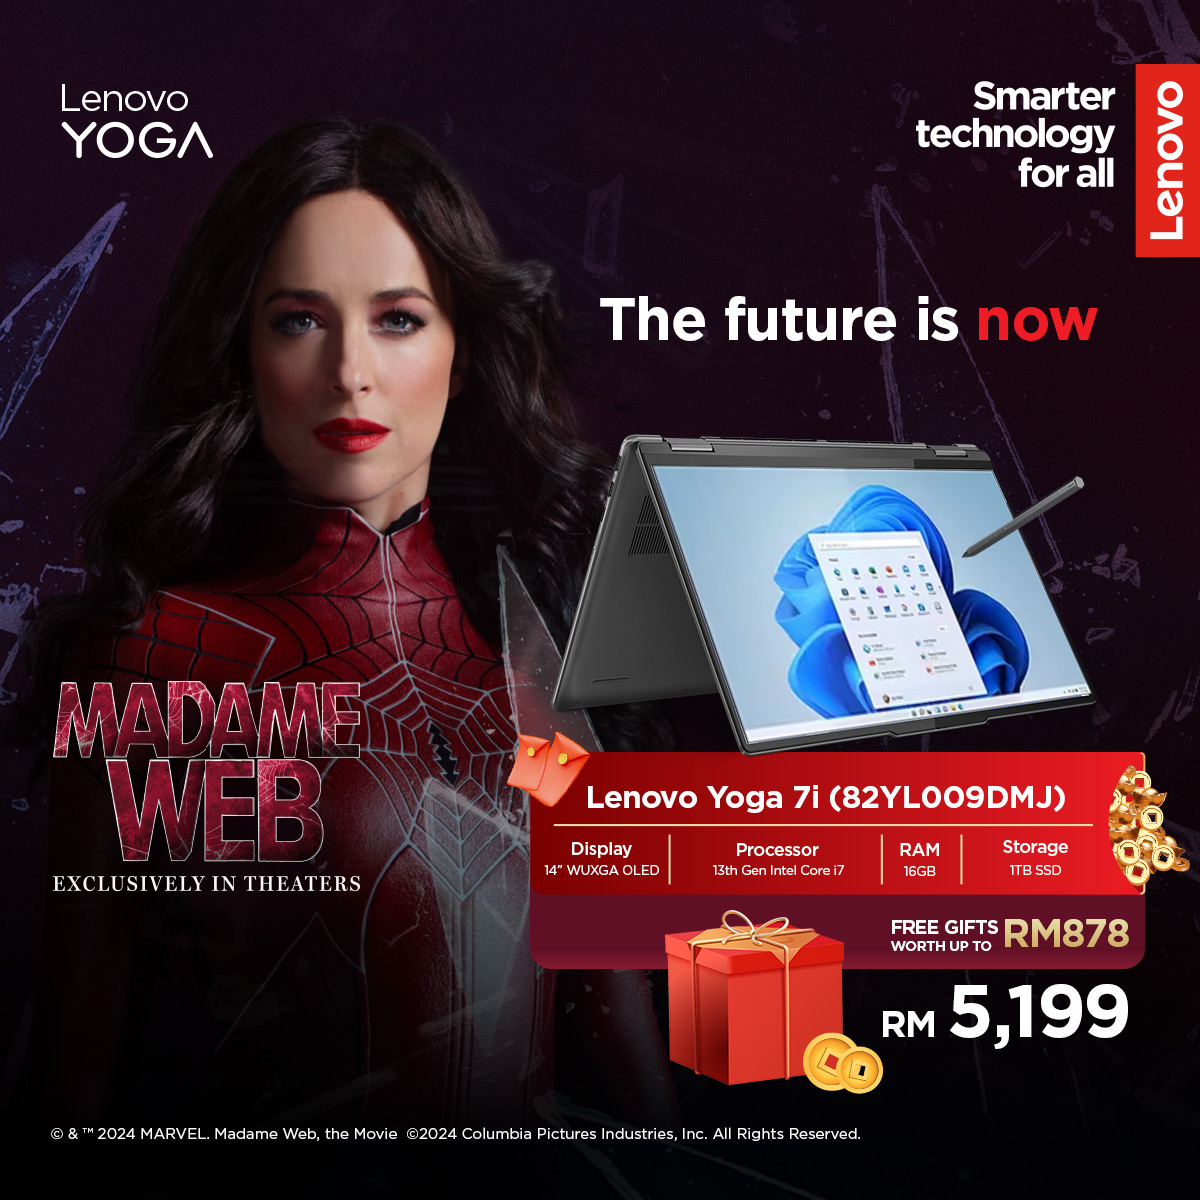 Get the Yoga 7i with touch screen